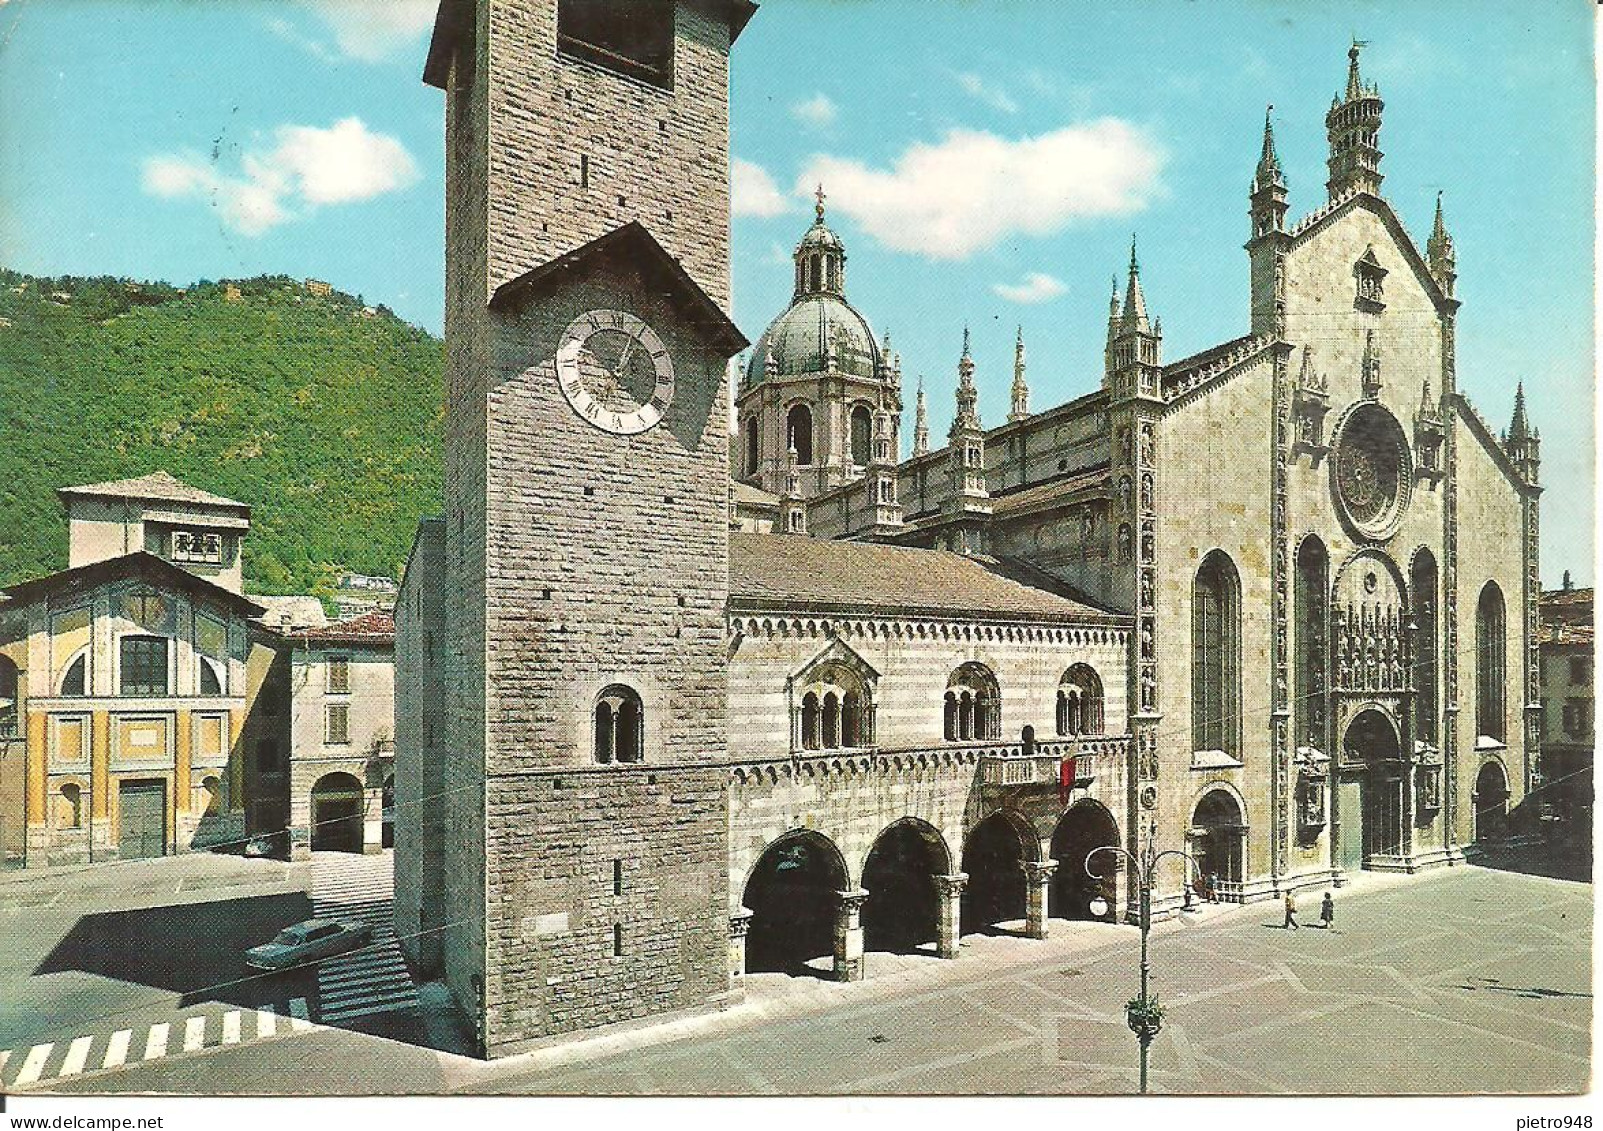 Como (Lombardia) Duomo, Broletto E Chiesa S. Giacomo, The Cathedral, The Town Hall And St. James Curch - Como